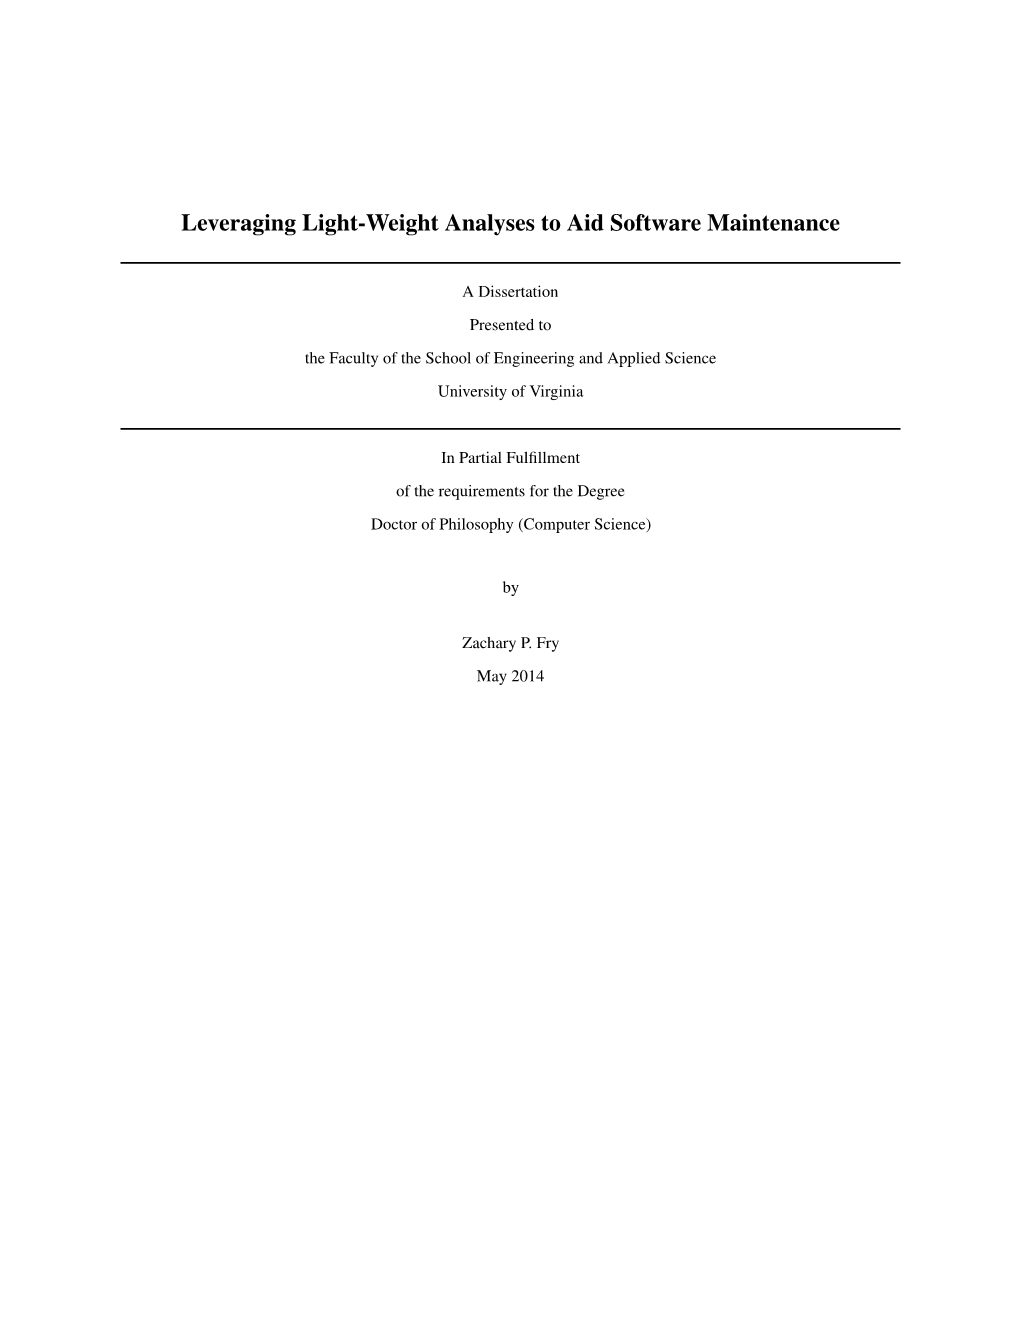 Leveraging Light-Weight Analyses to Aid Software Maintenance